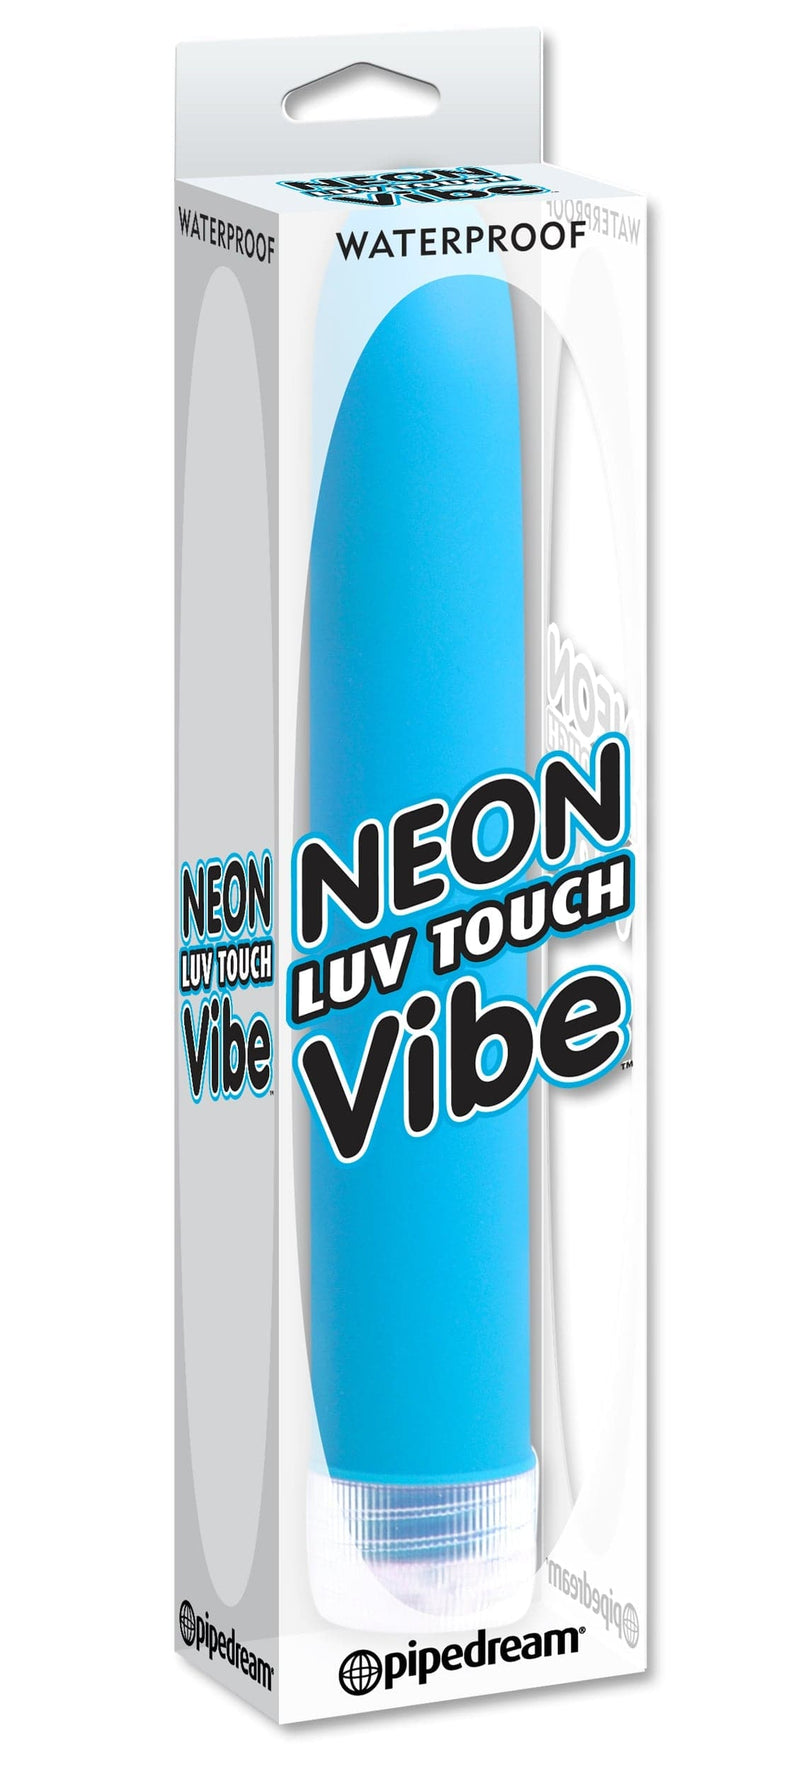 neon-luv-touch-vibe-blue